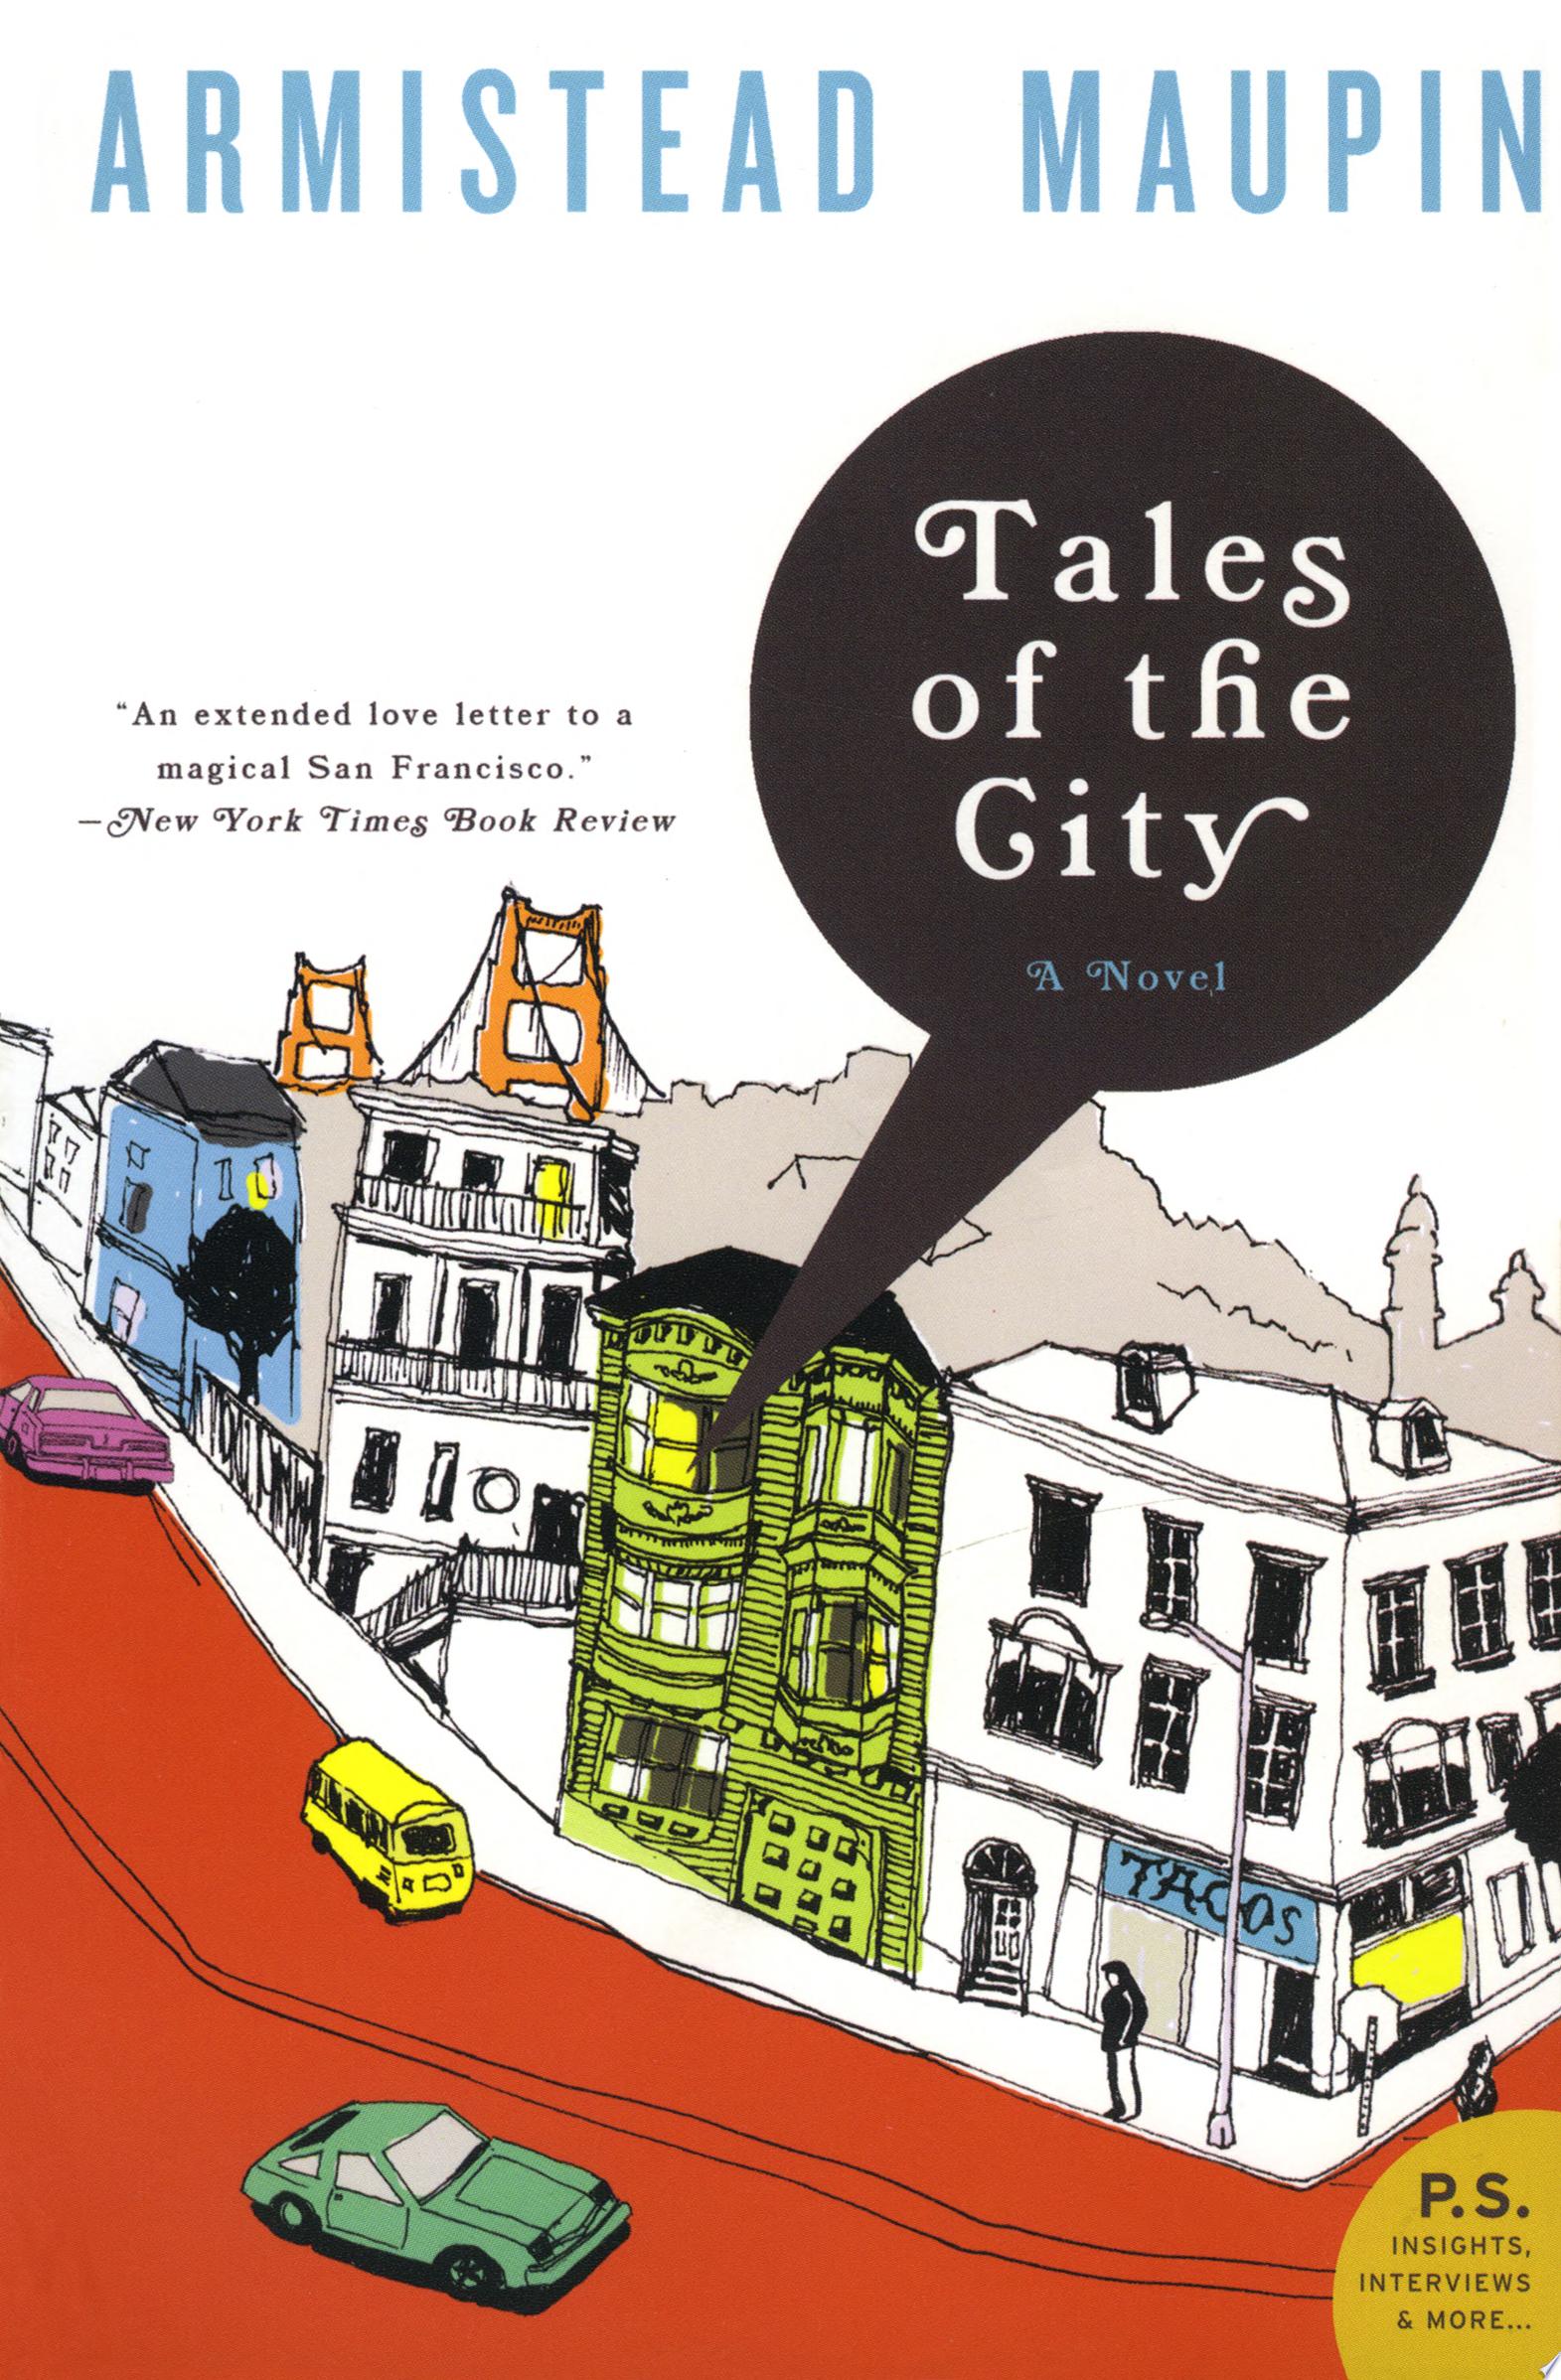 Image for "Tales of the City"